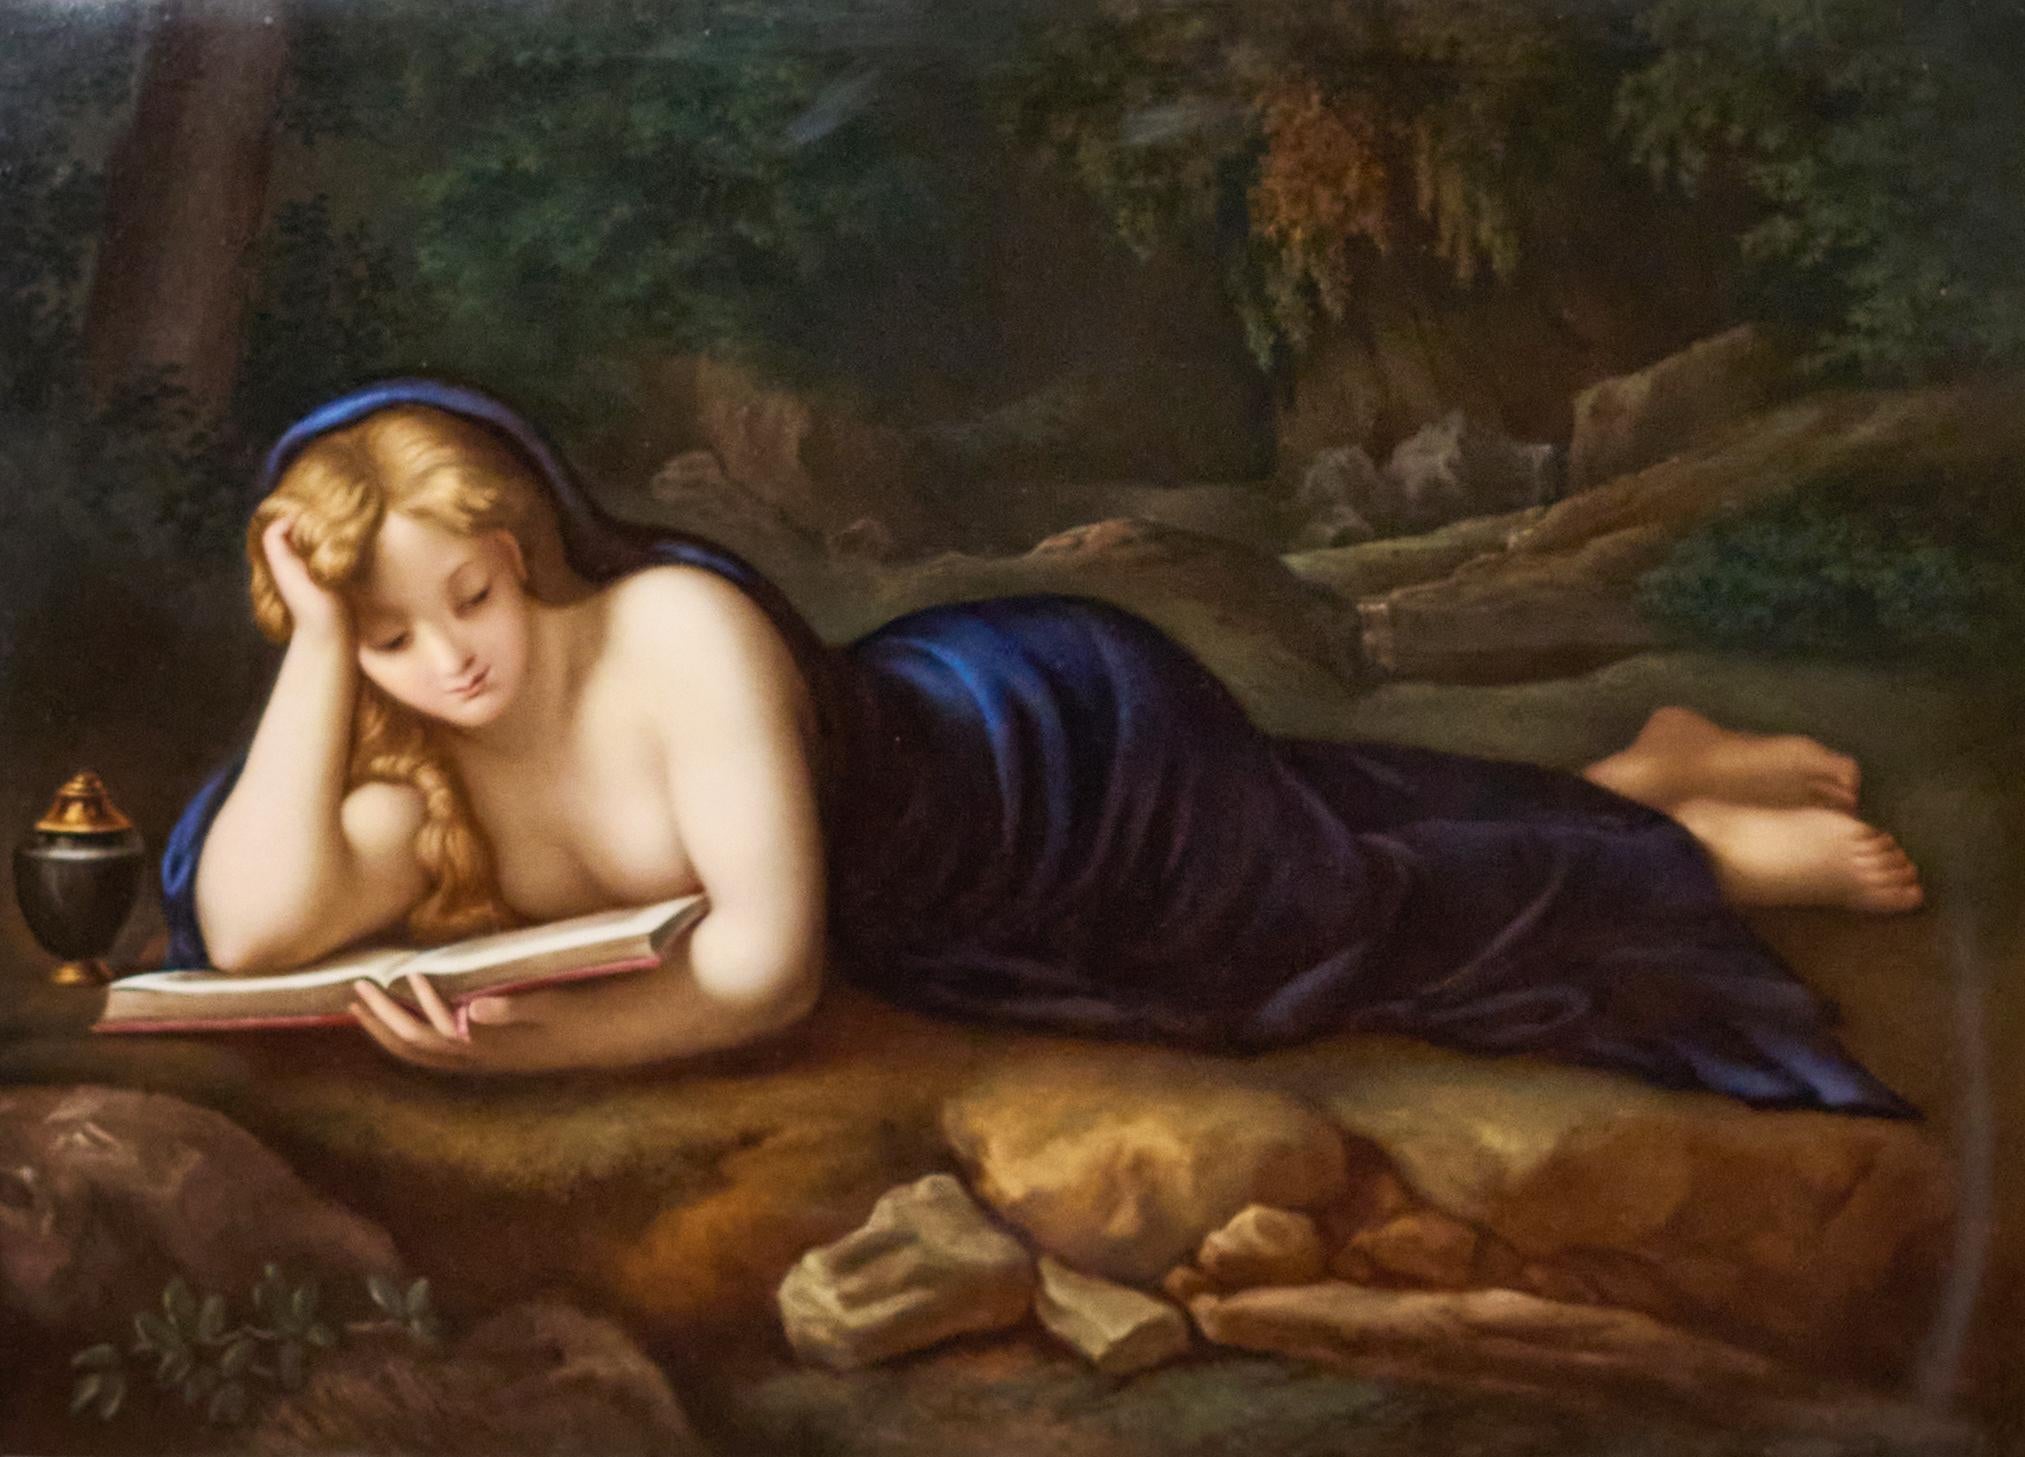 A large 19th century German Meissen rectangular porcelain plaque depicting Mary Magdalene reclining reading from a book. After Antonio Allegri (Italian, 1489-1534), called Correggio. Mary situated in a grotto, clothed only in a cloak, reading